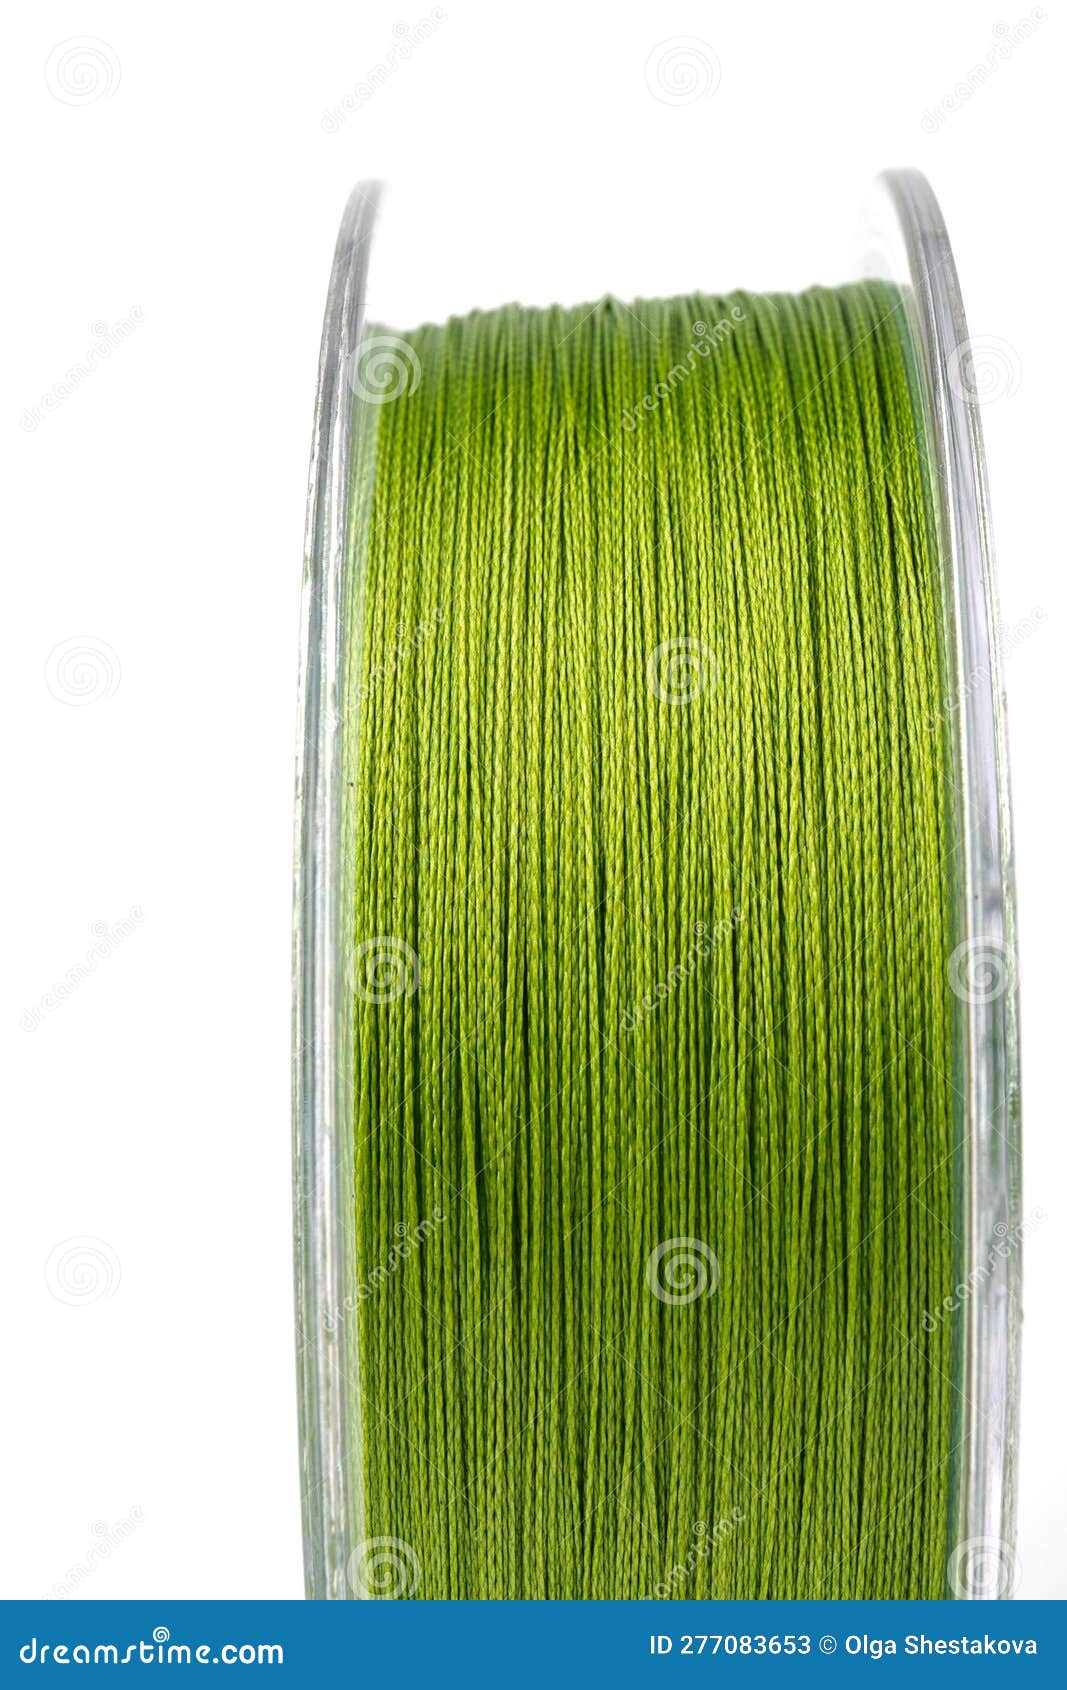 Braided Green Line for Fishing on a Transparent Coil, Isolate